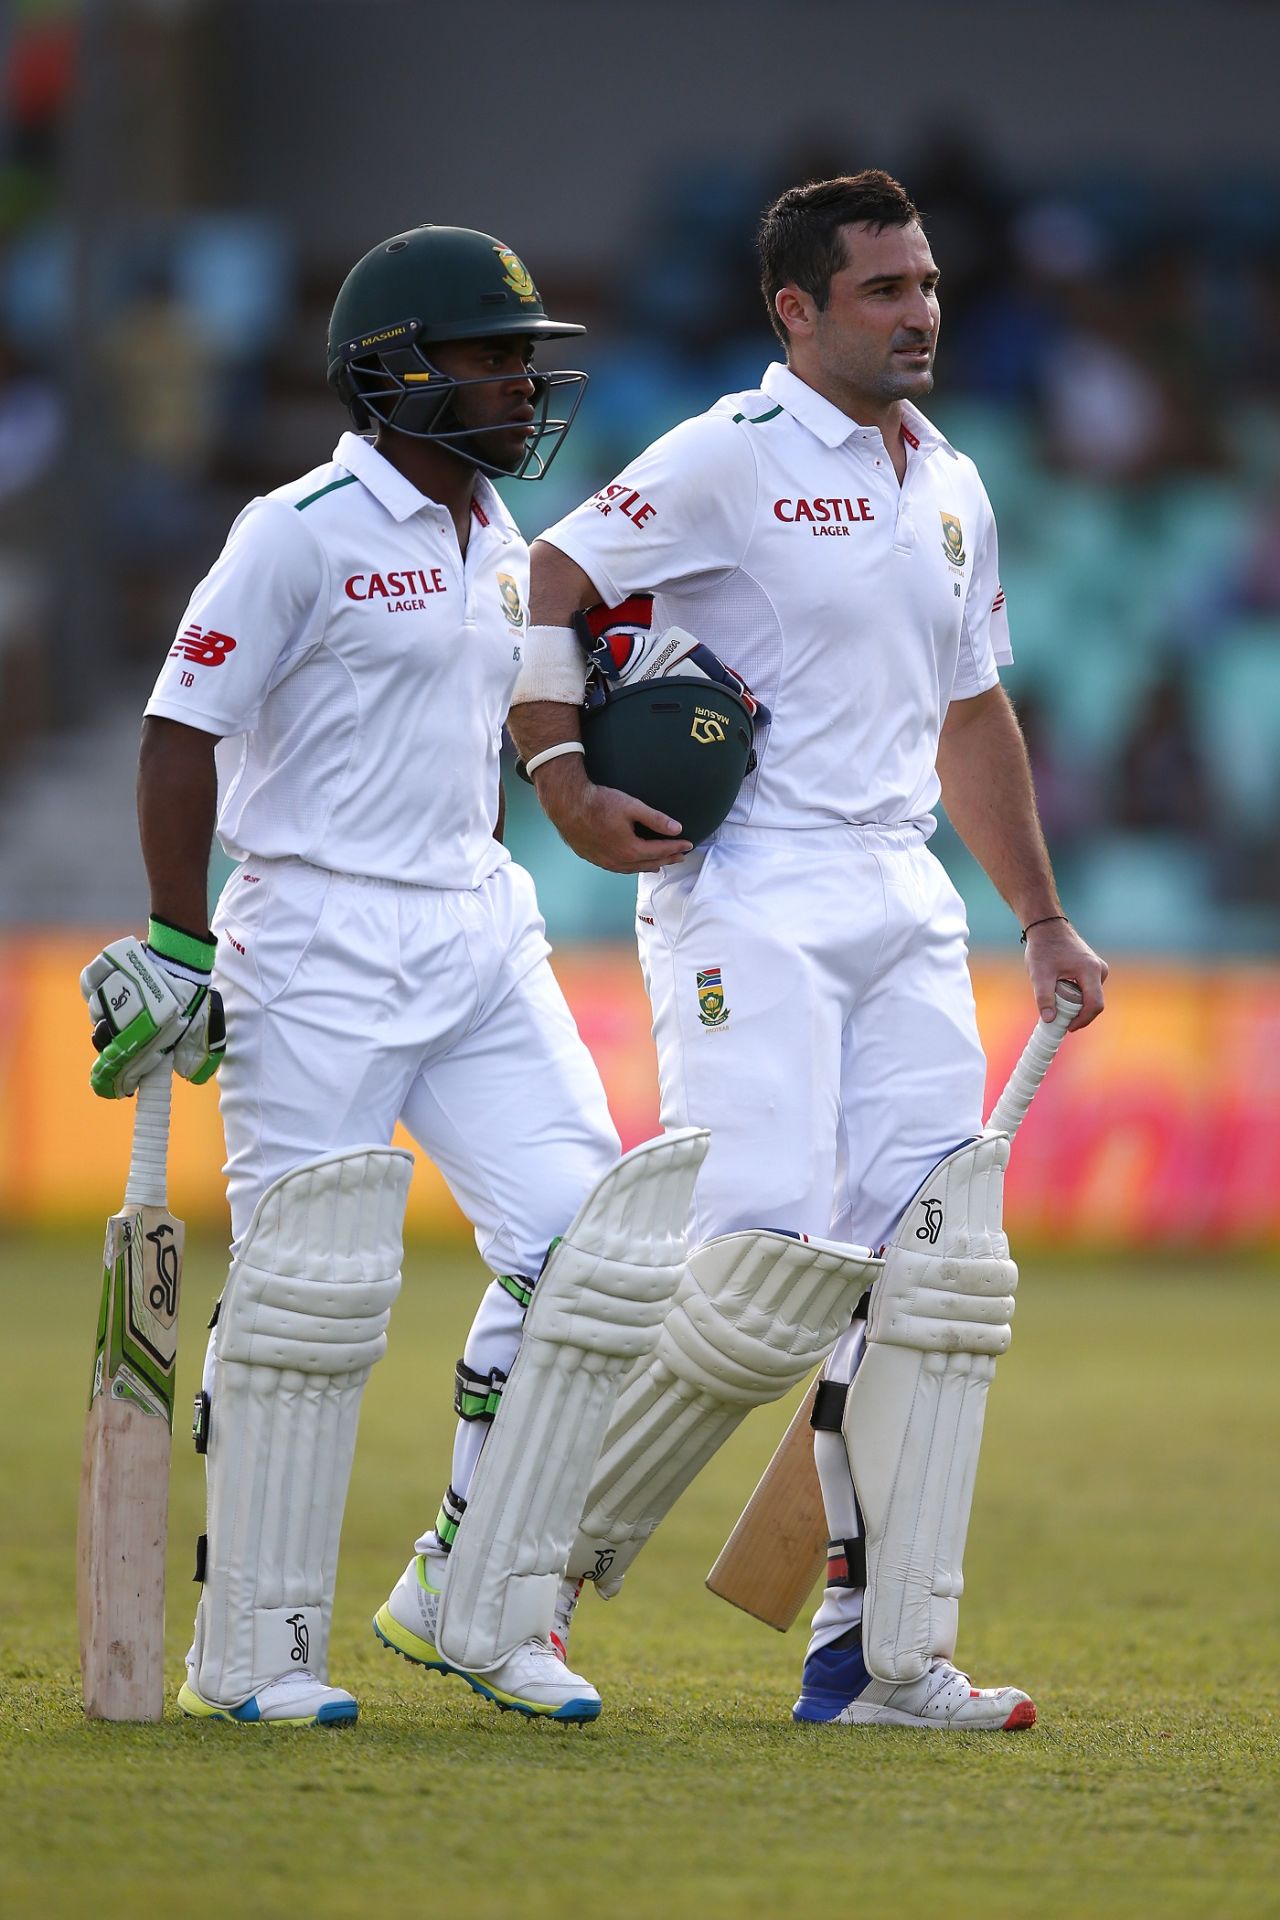 Temba Bavuma and Dean Elgar walk off at the end of the day's play, South Africa v England, 1st Test, Durban, 2nd day, December 27, 2015